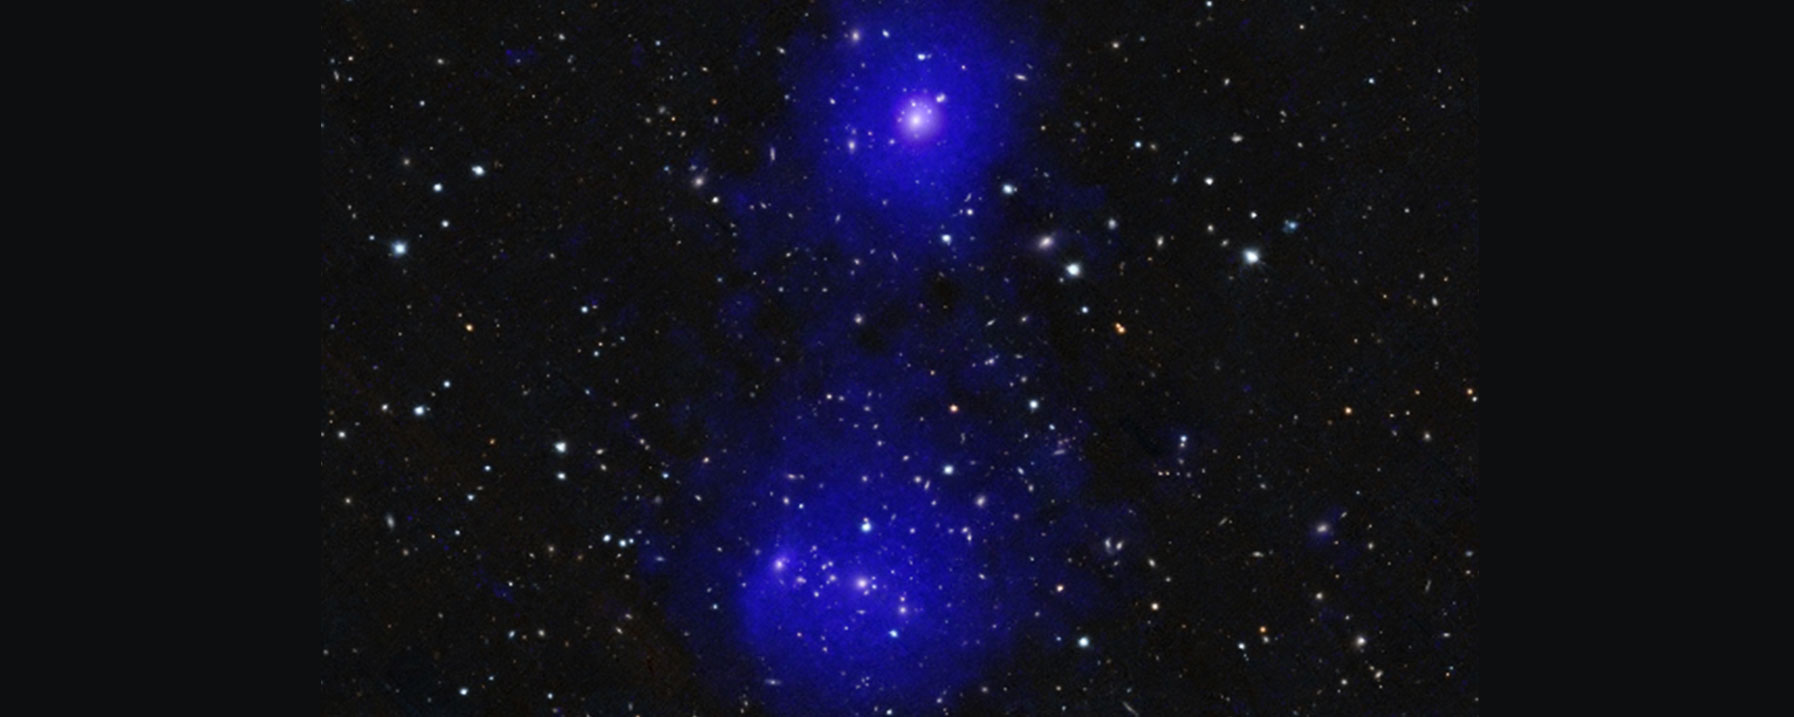 Abell 98 is a system of galaxy clusters in the early stages of a collision. 